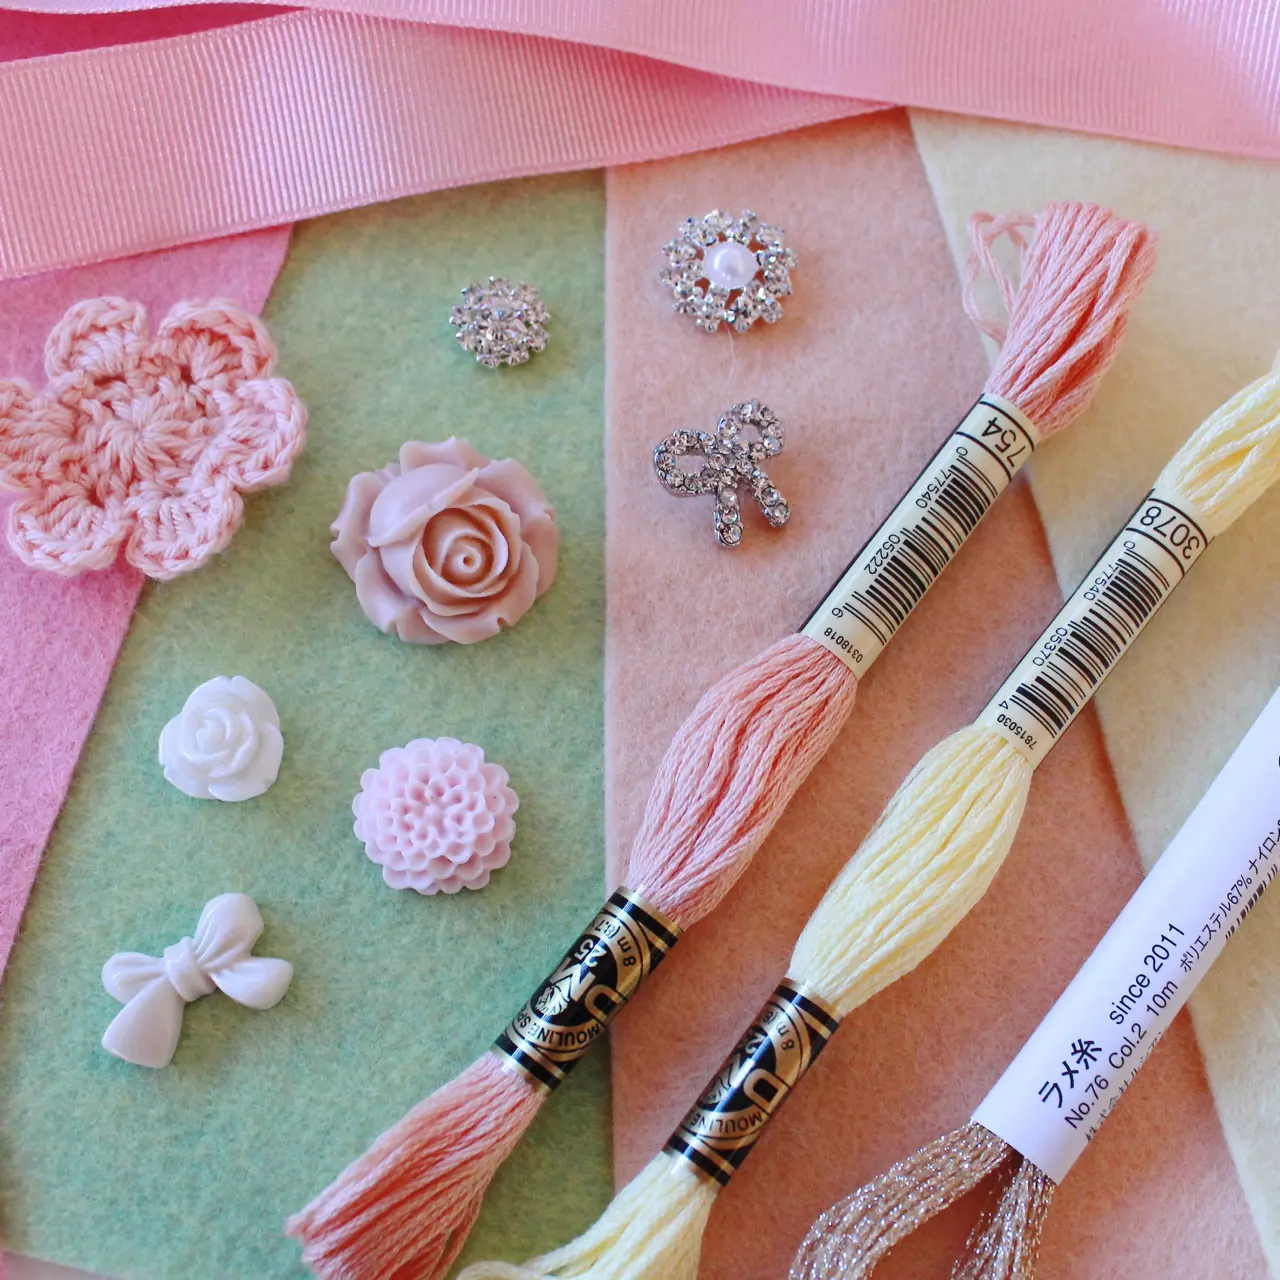 Choose some pastel felt and pretty embellishments from your stash